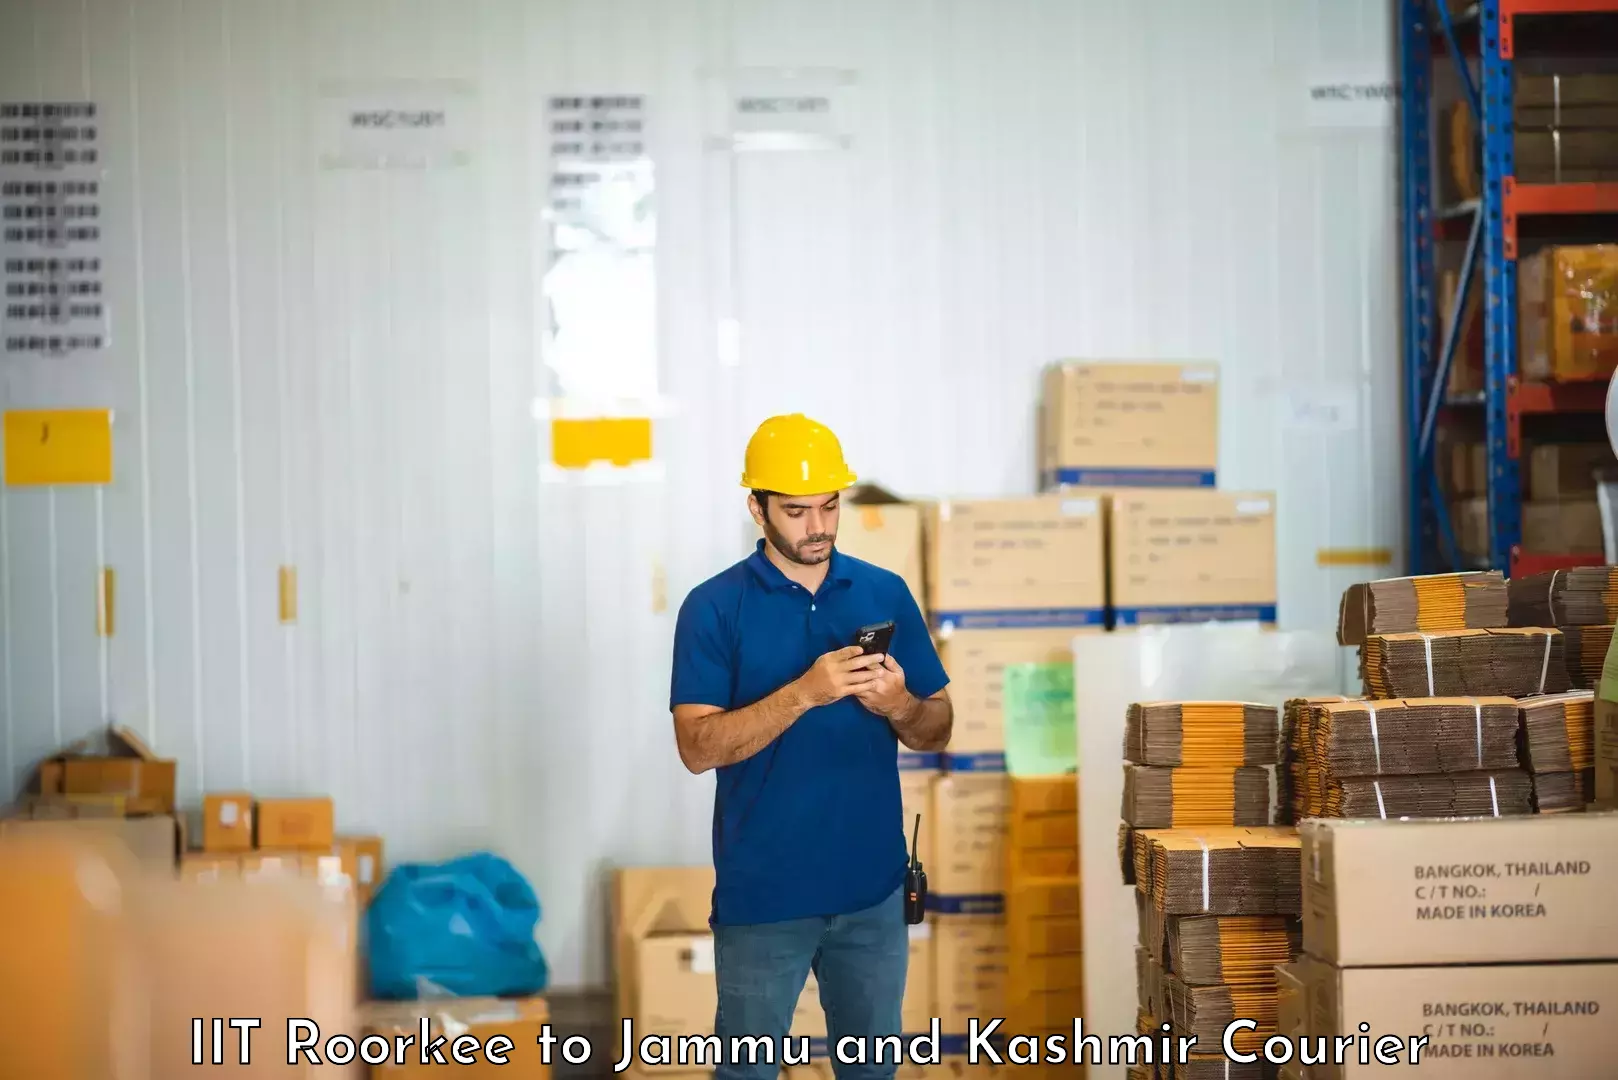 Efficient packing and moving IIT Roorkee to Jammu and Kashmir